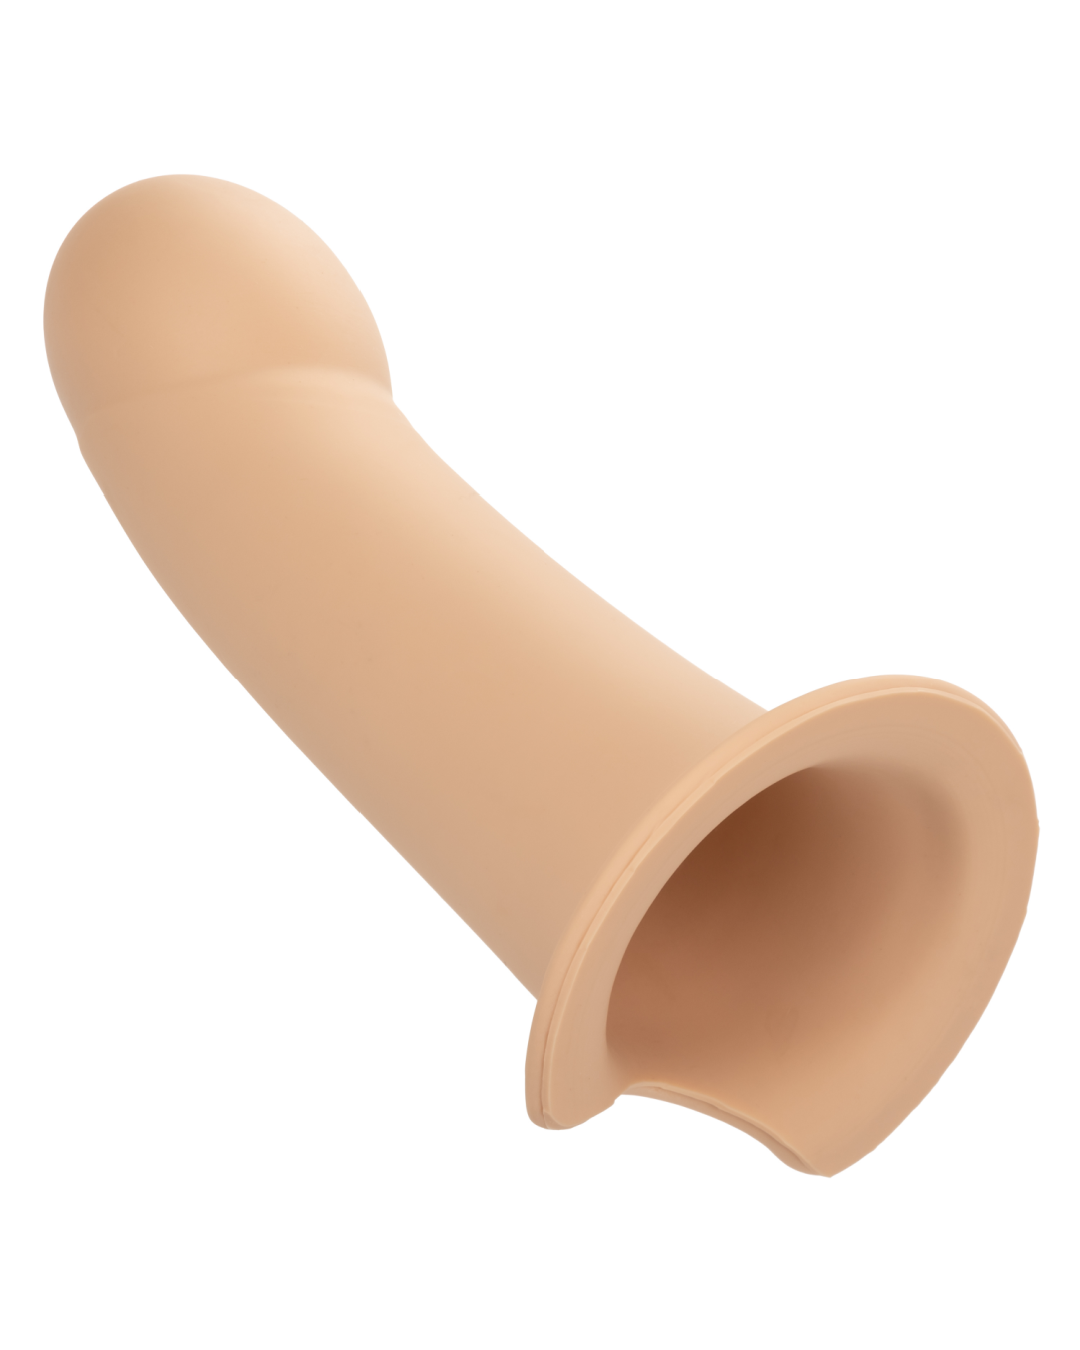 Maxx Smooth Hollow Dildo Silicone Strap-on Penis Extension (Light)